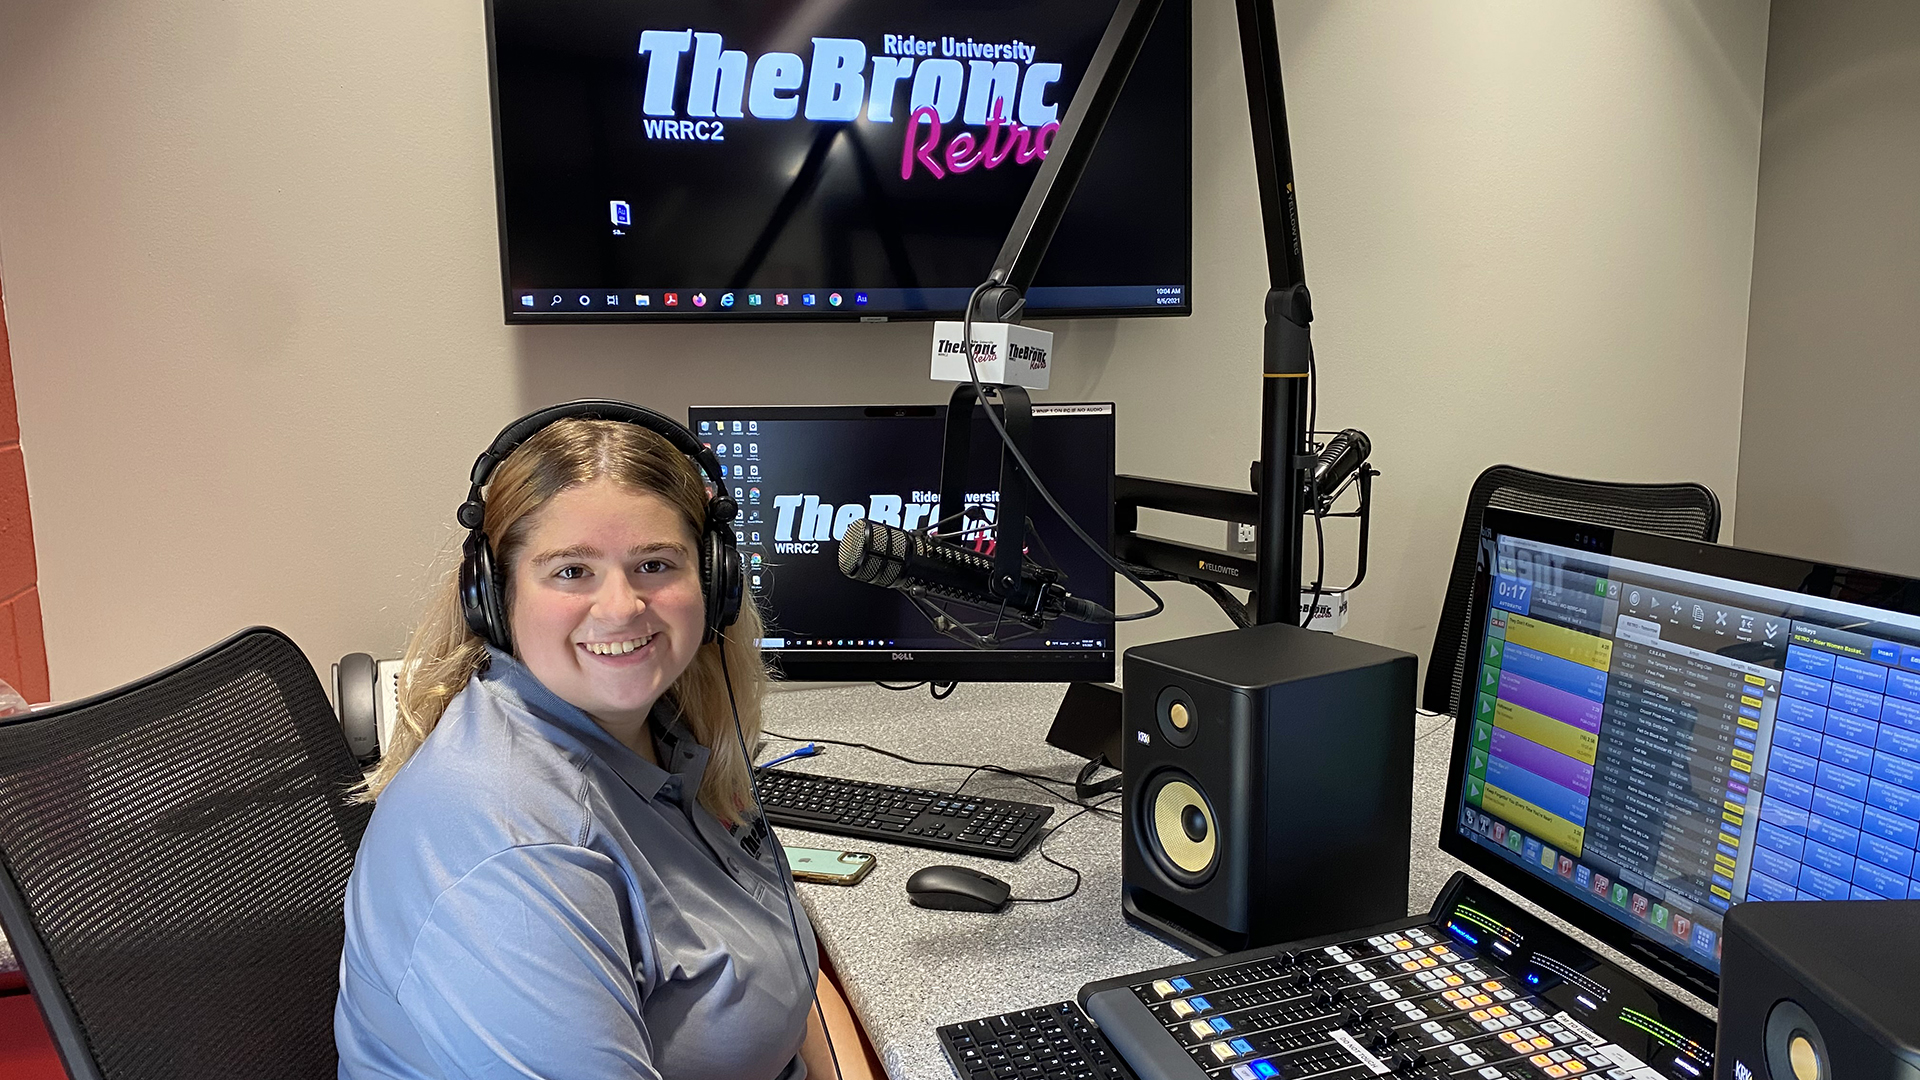 Student works at 107.7 The Bronc radio station